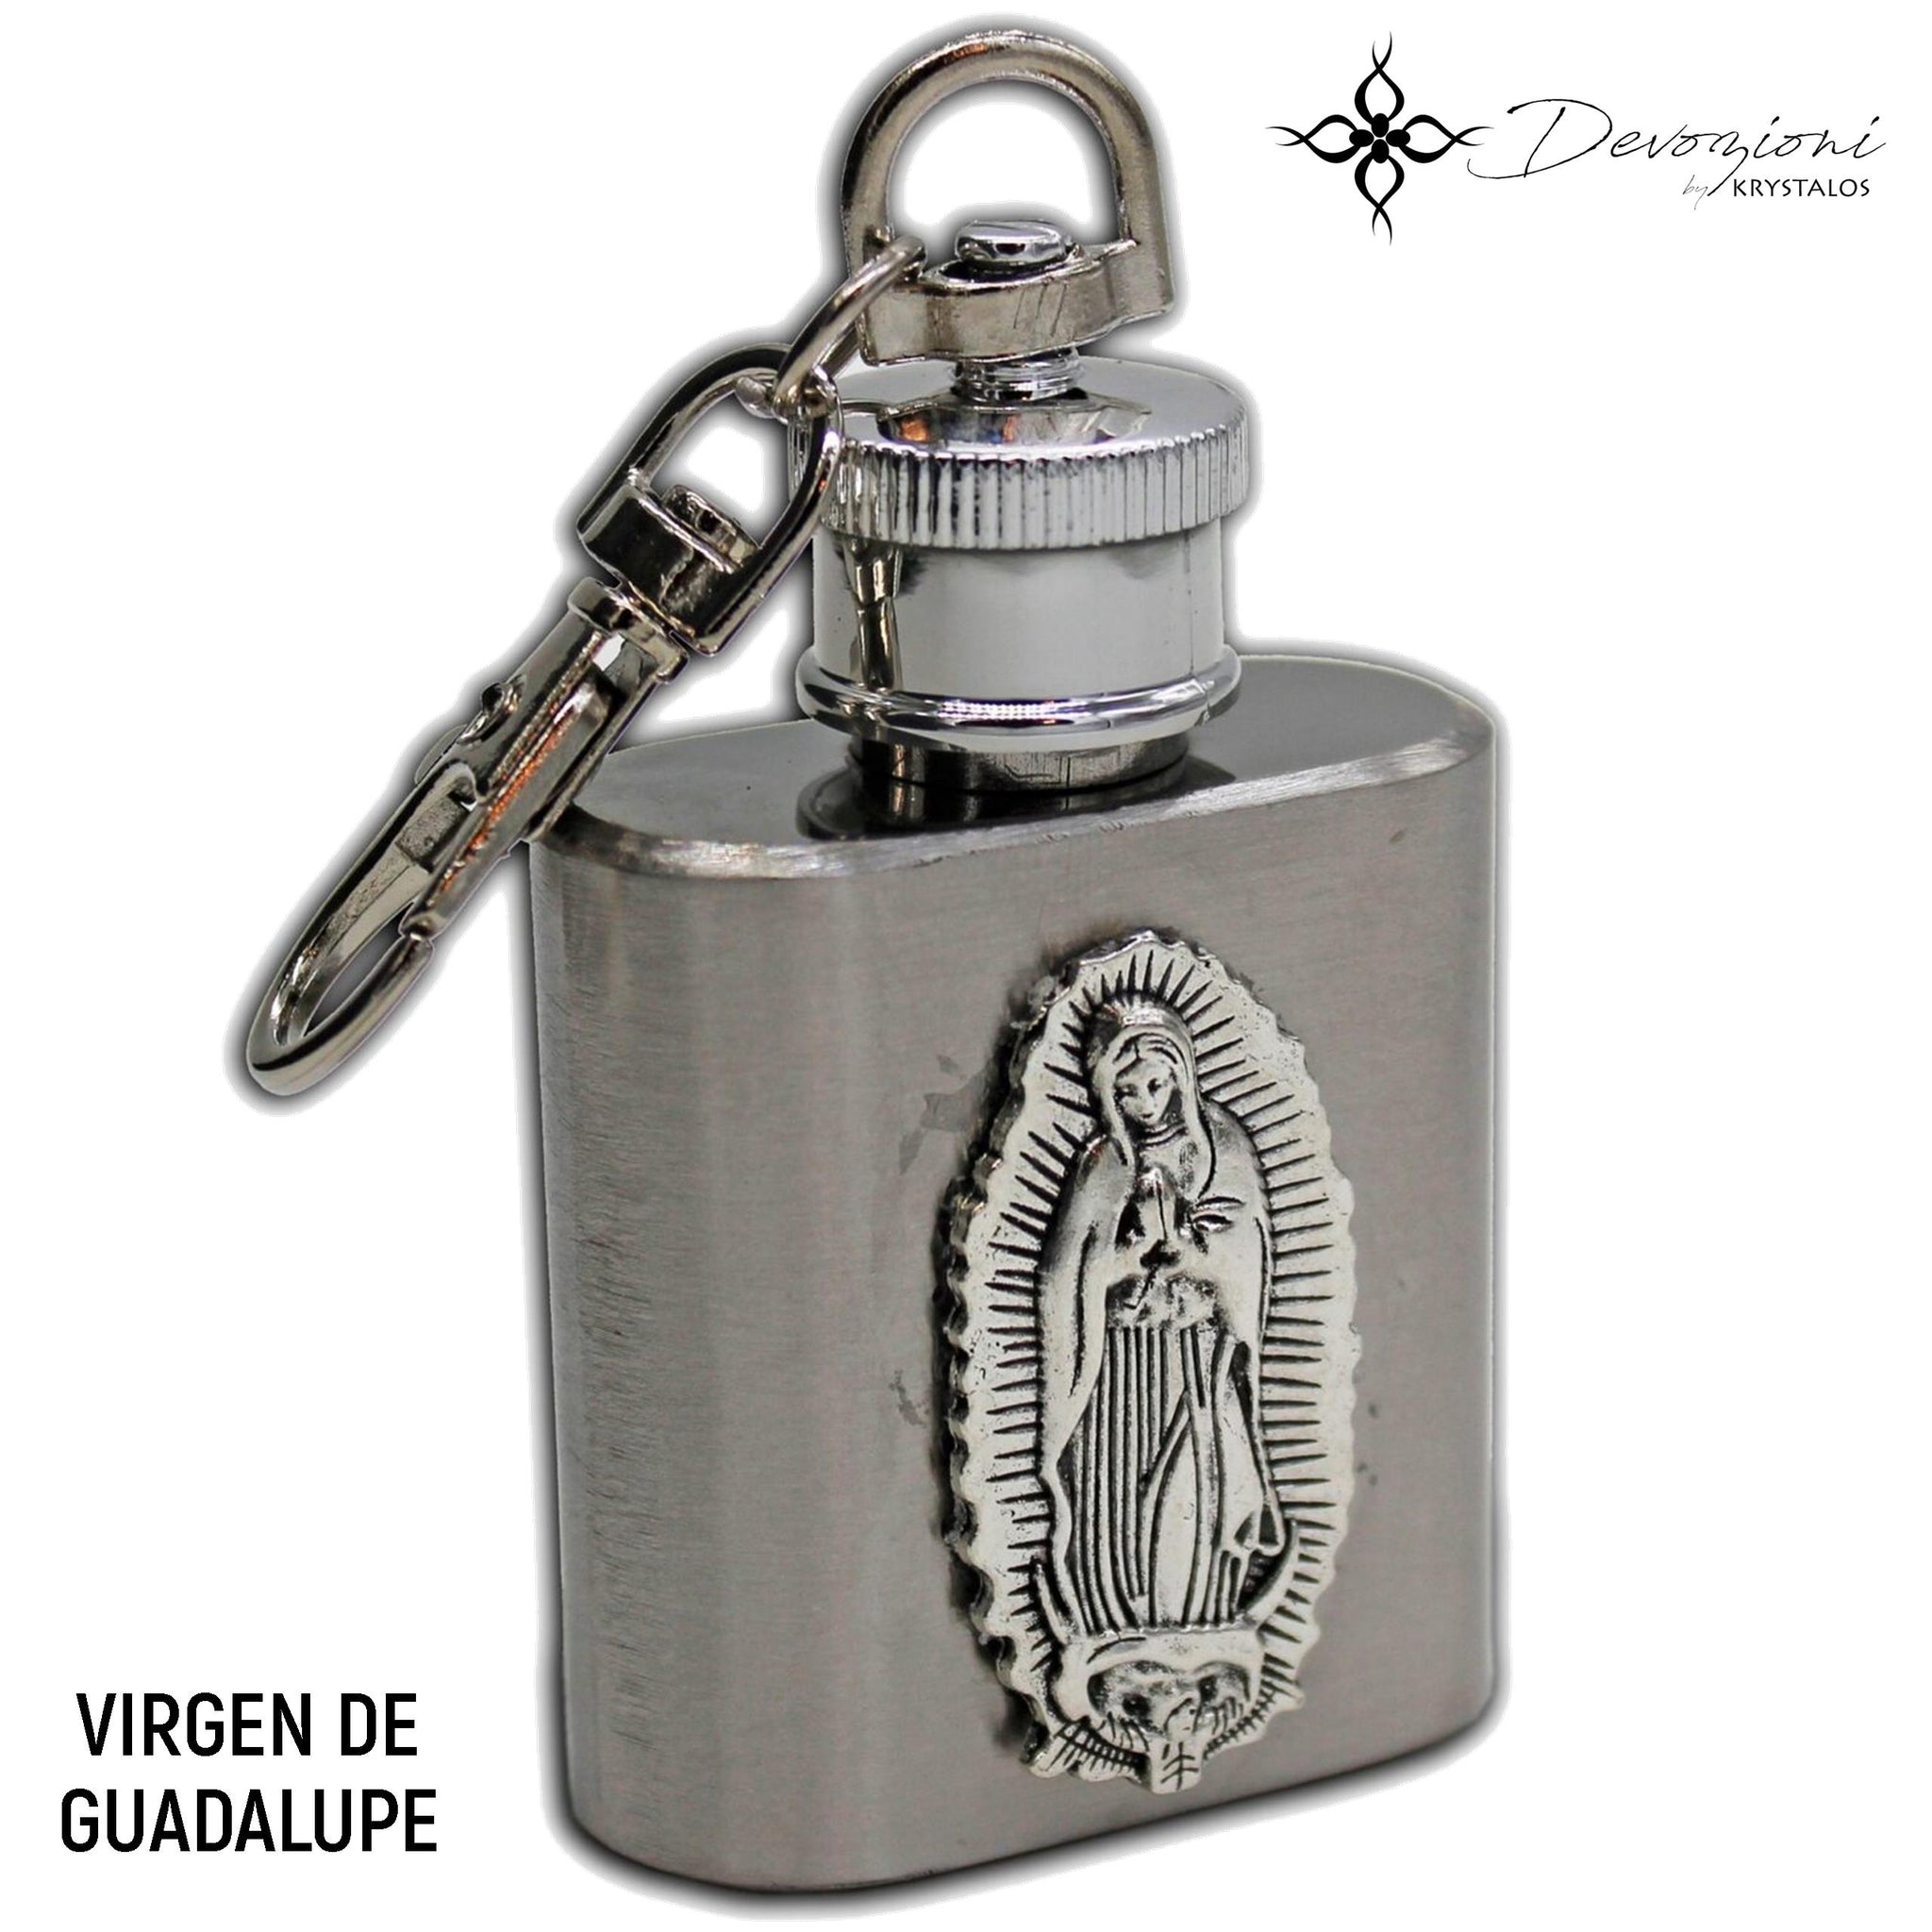 1 OZ Stainless Steel Bottle for Sacramentals (Holy Water, Holy Oils, etc.) - Choose your Devotion